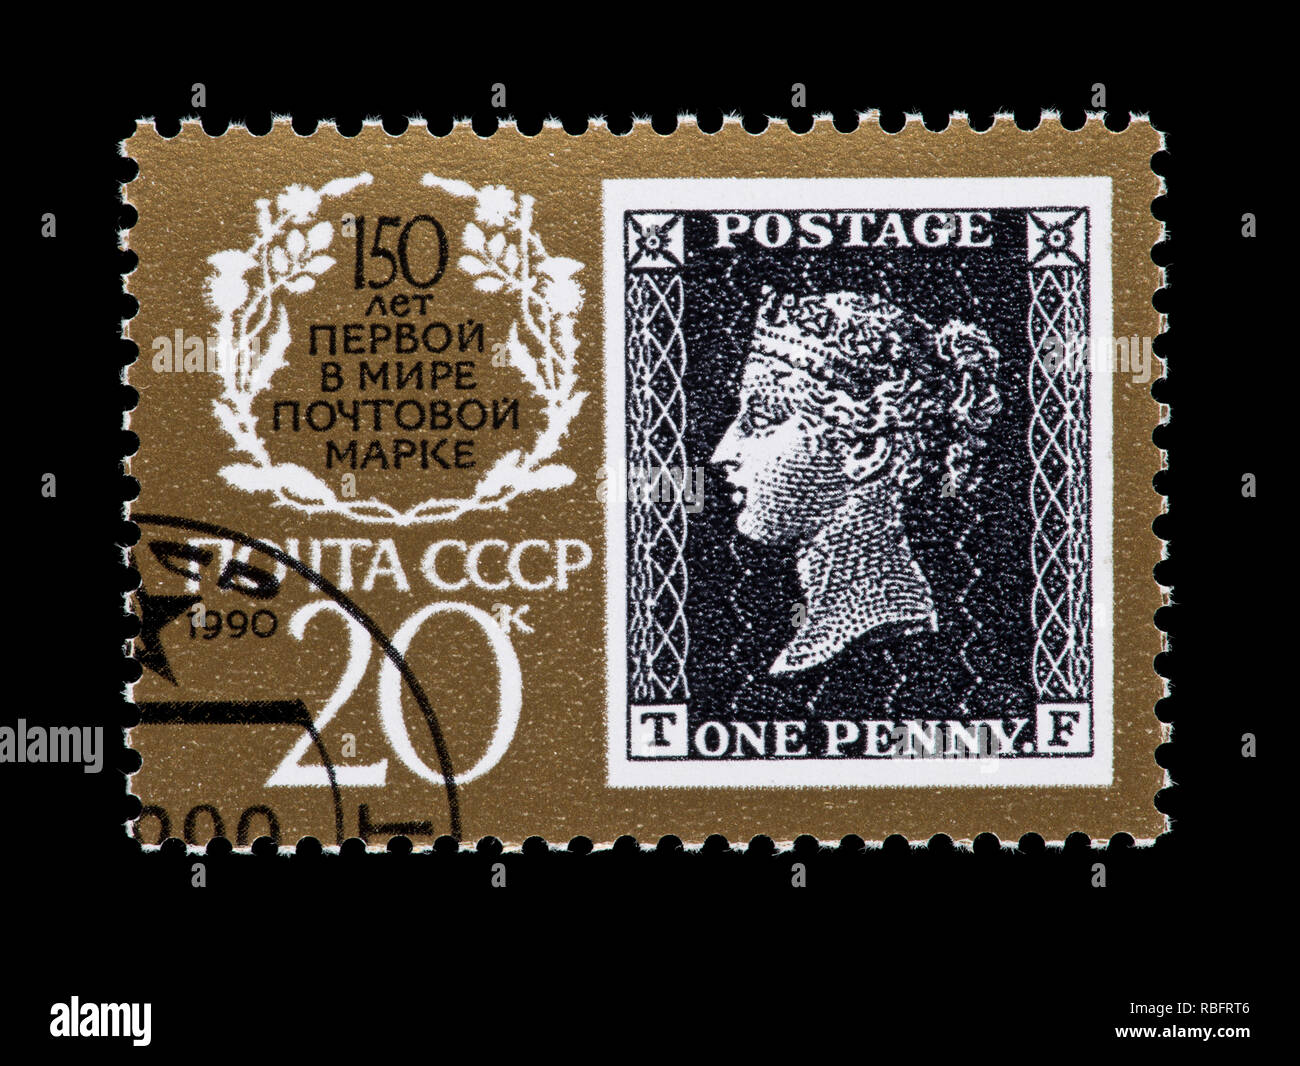 Postage stamp from the Soviet Union depicting the Penny Black stamp from Great Britain and an emblem. Stock Photo